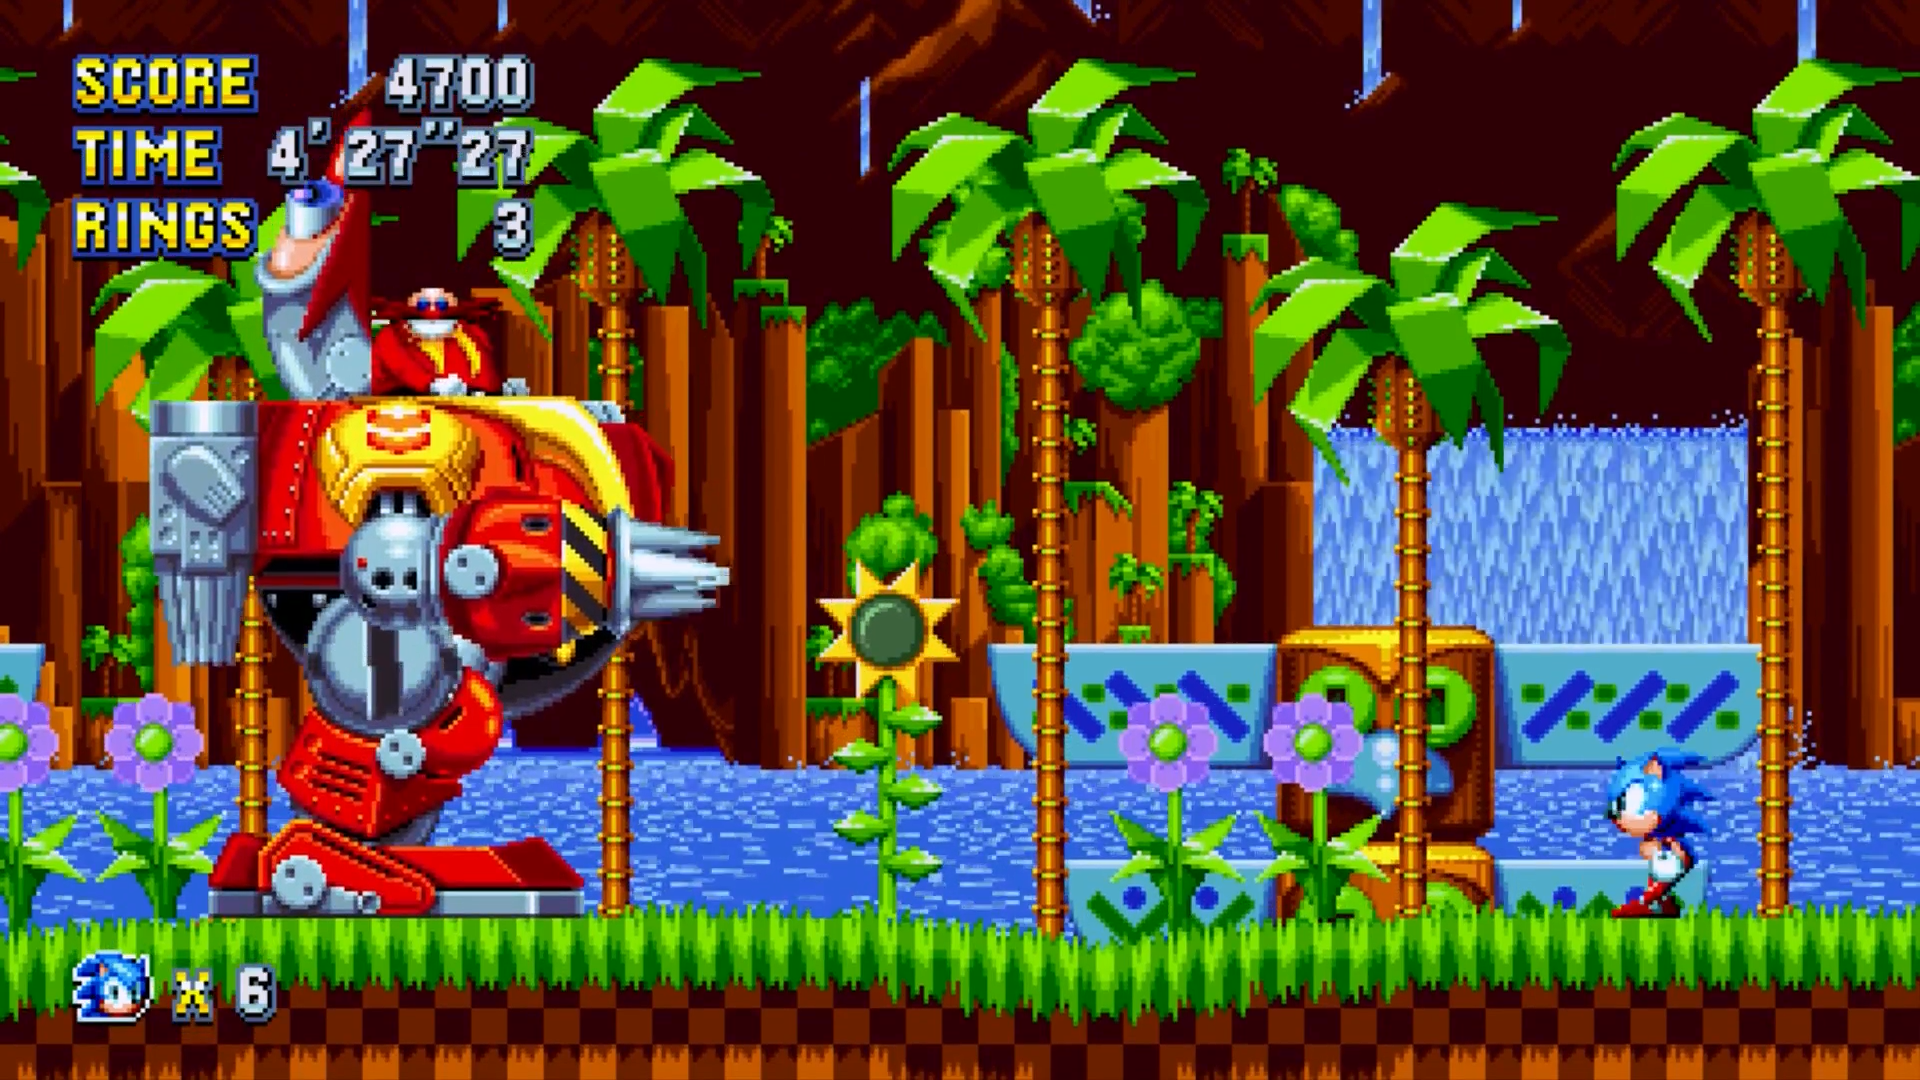 Sonic Mania - Green Hill Zone Act 2 + Special Stage + Boss Fight 